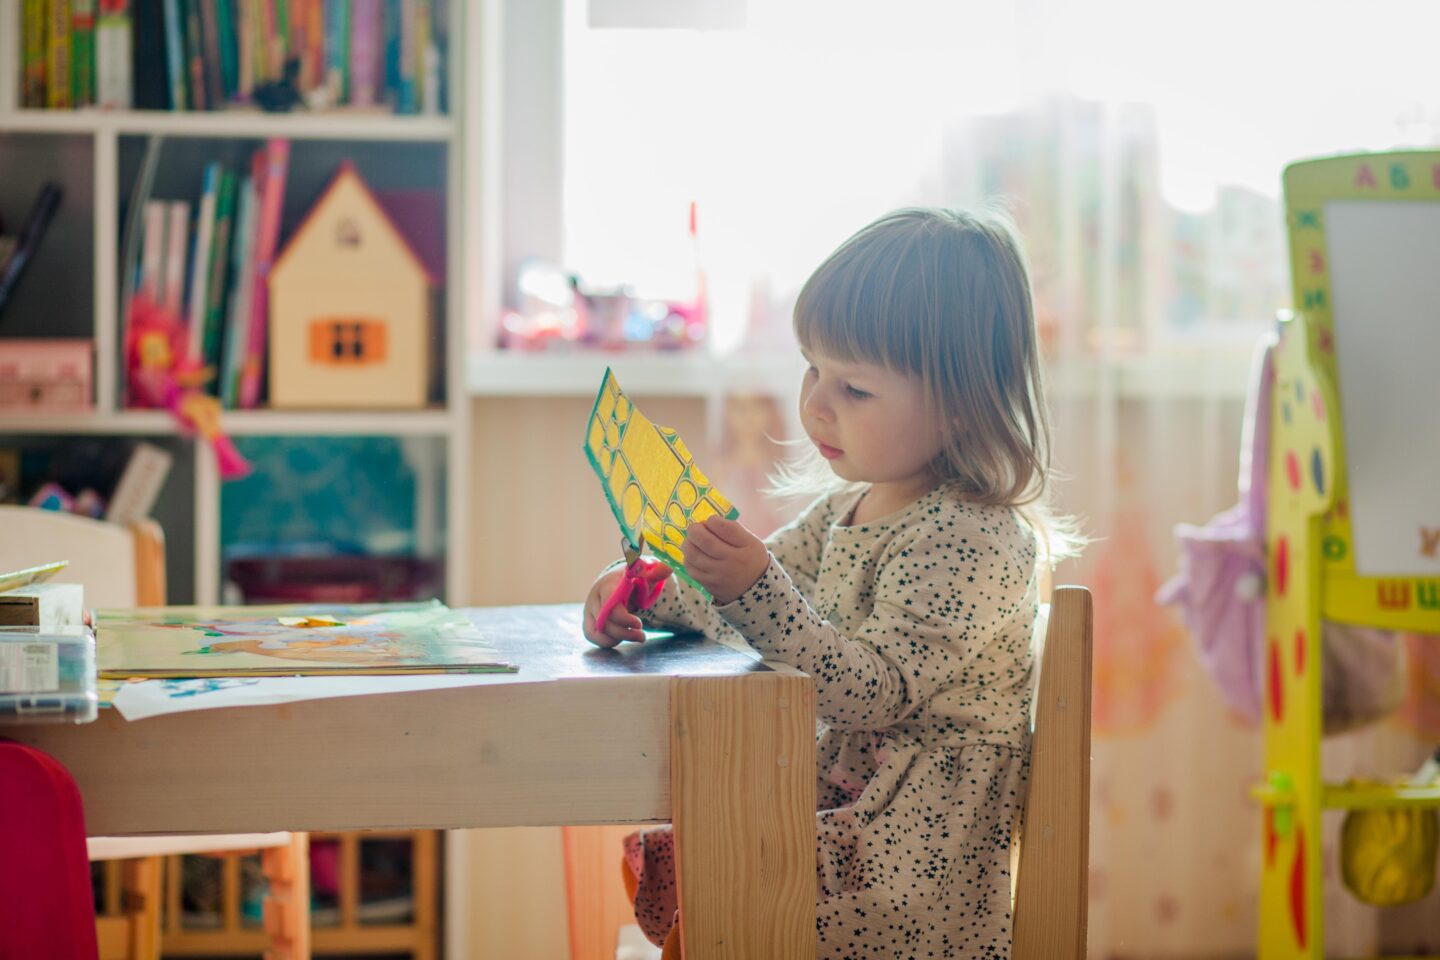 10 things to consider when looking for nurseries for your child